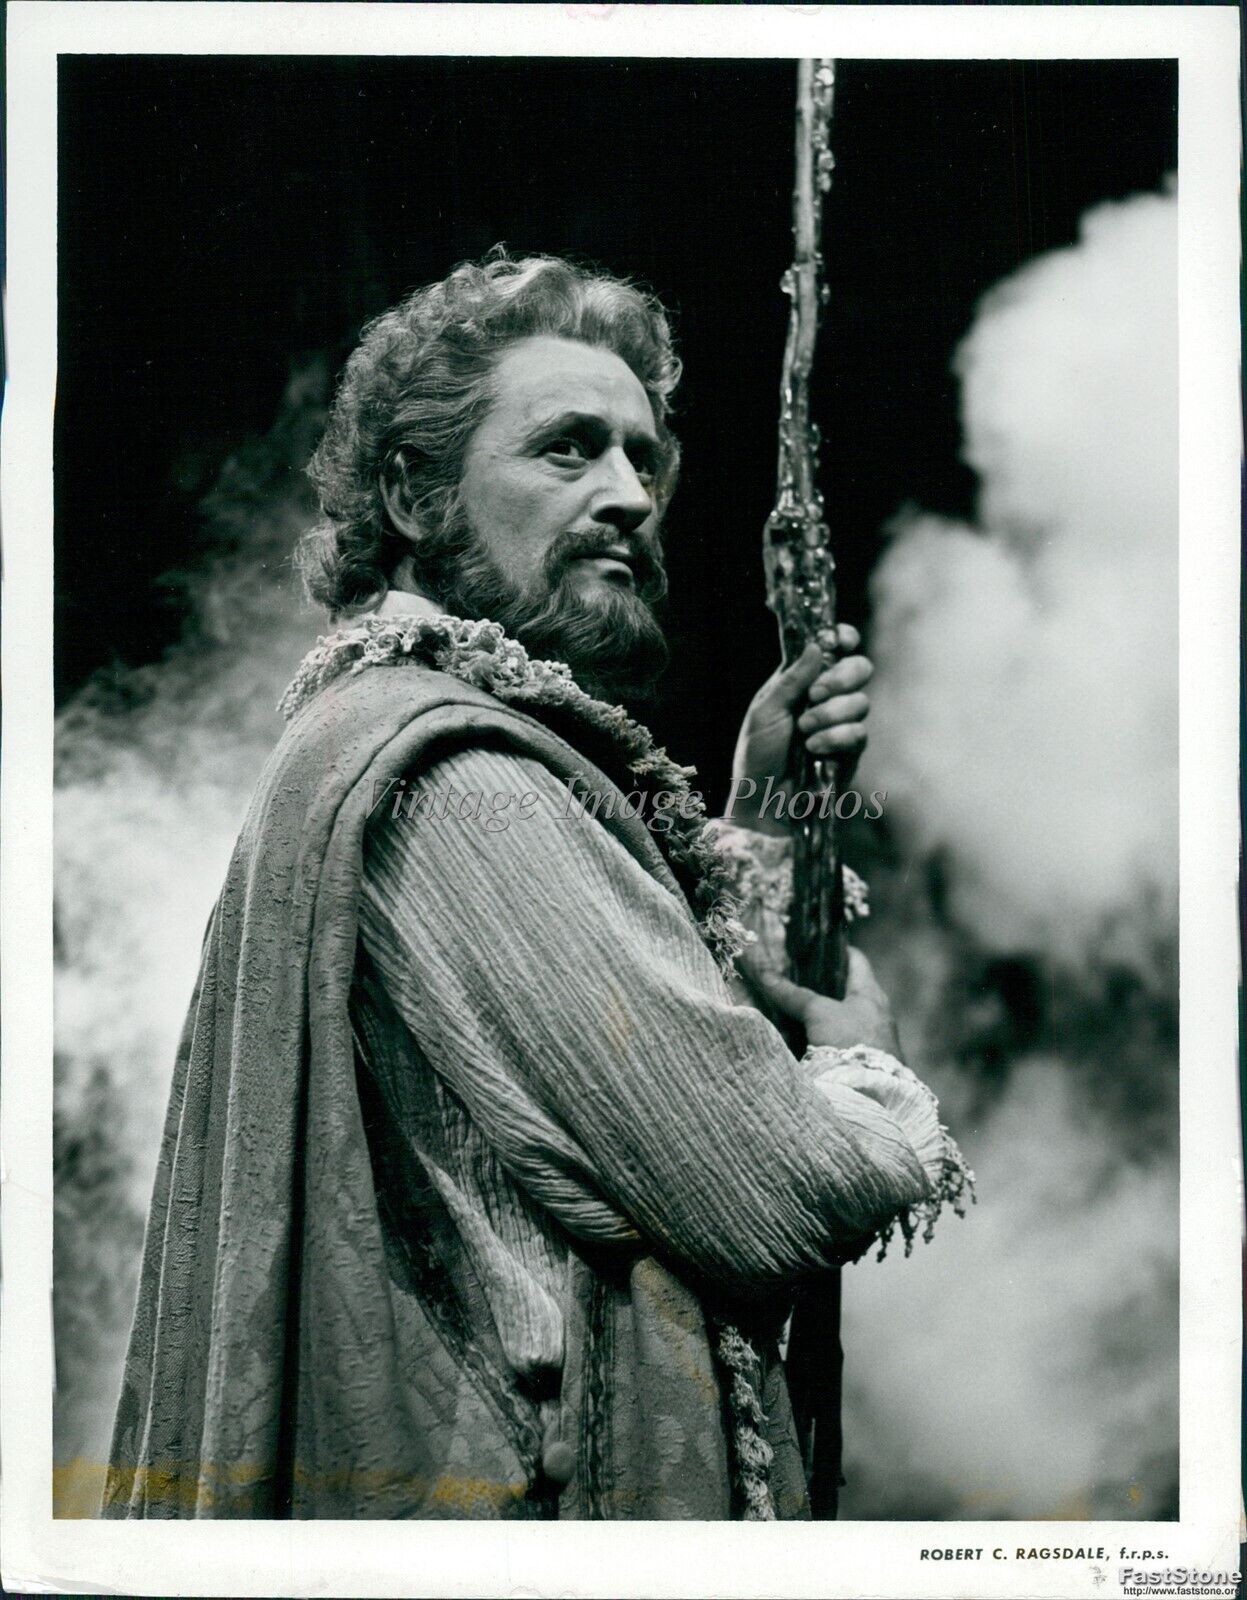 1982 Len Cariou Actor Starring As Prospero In Play The Tempest Theater 7X9 Photo